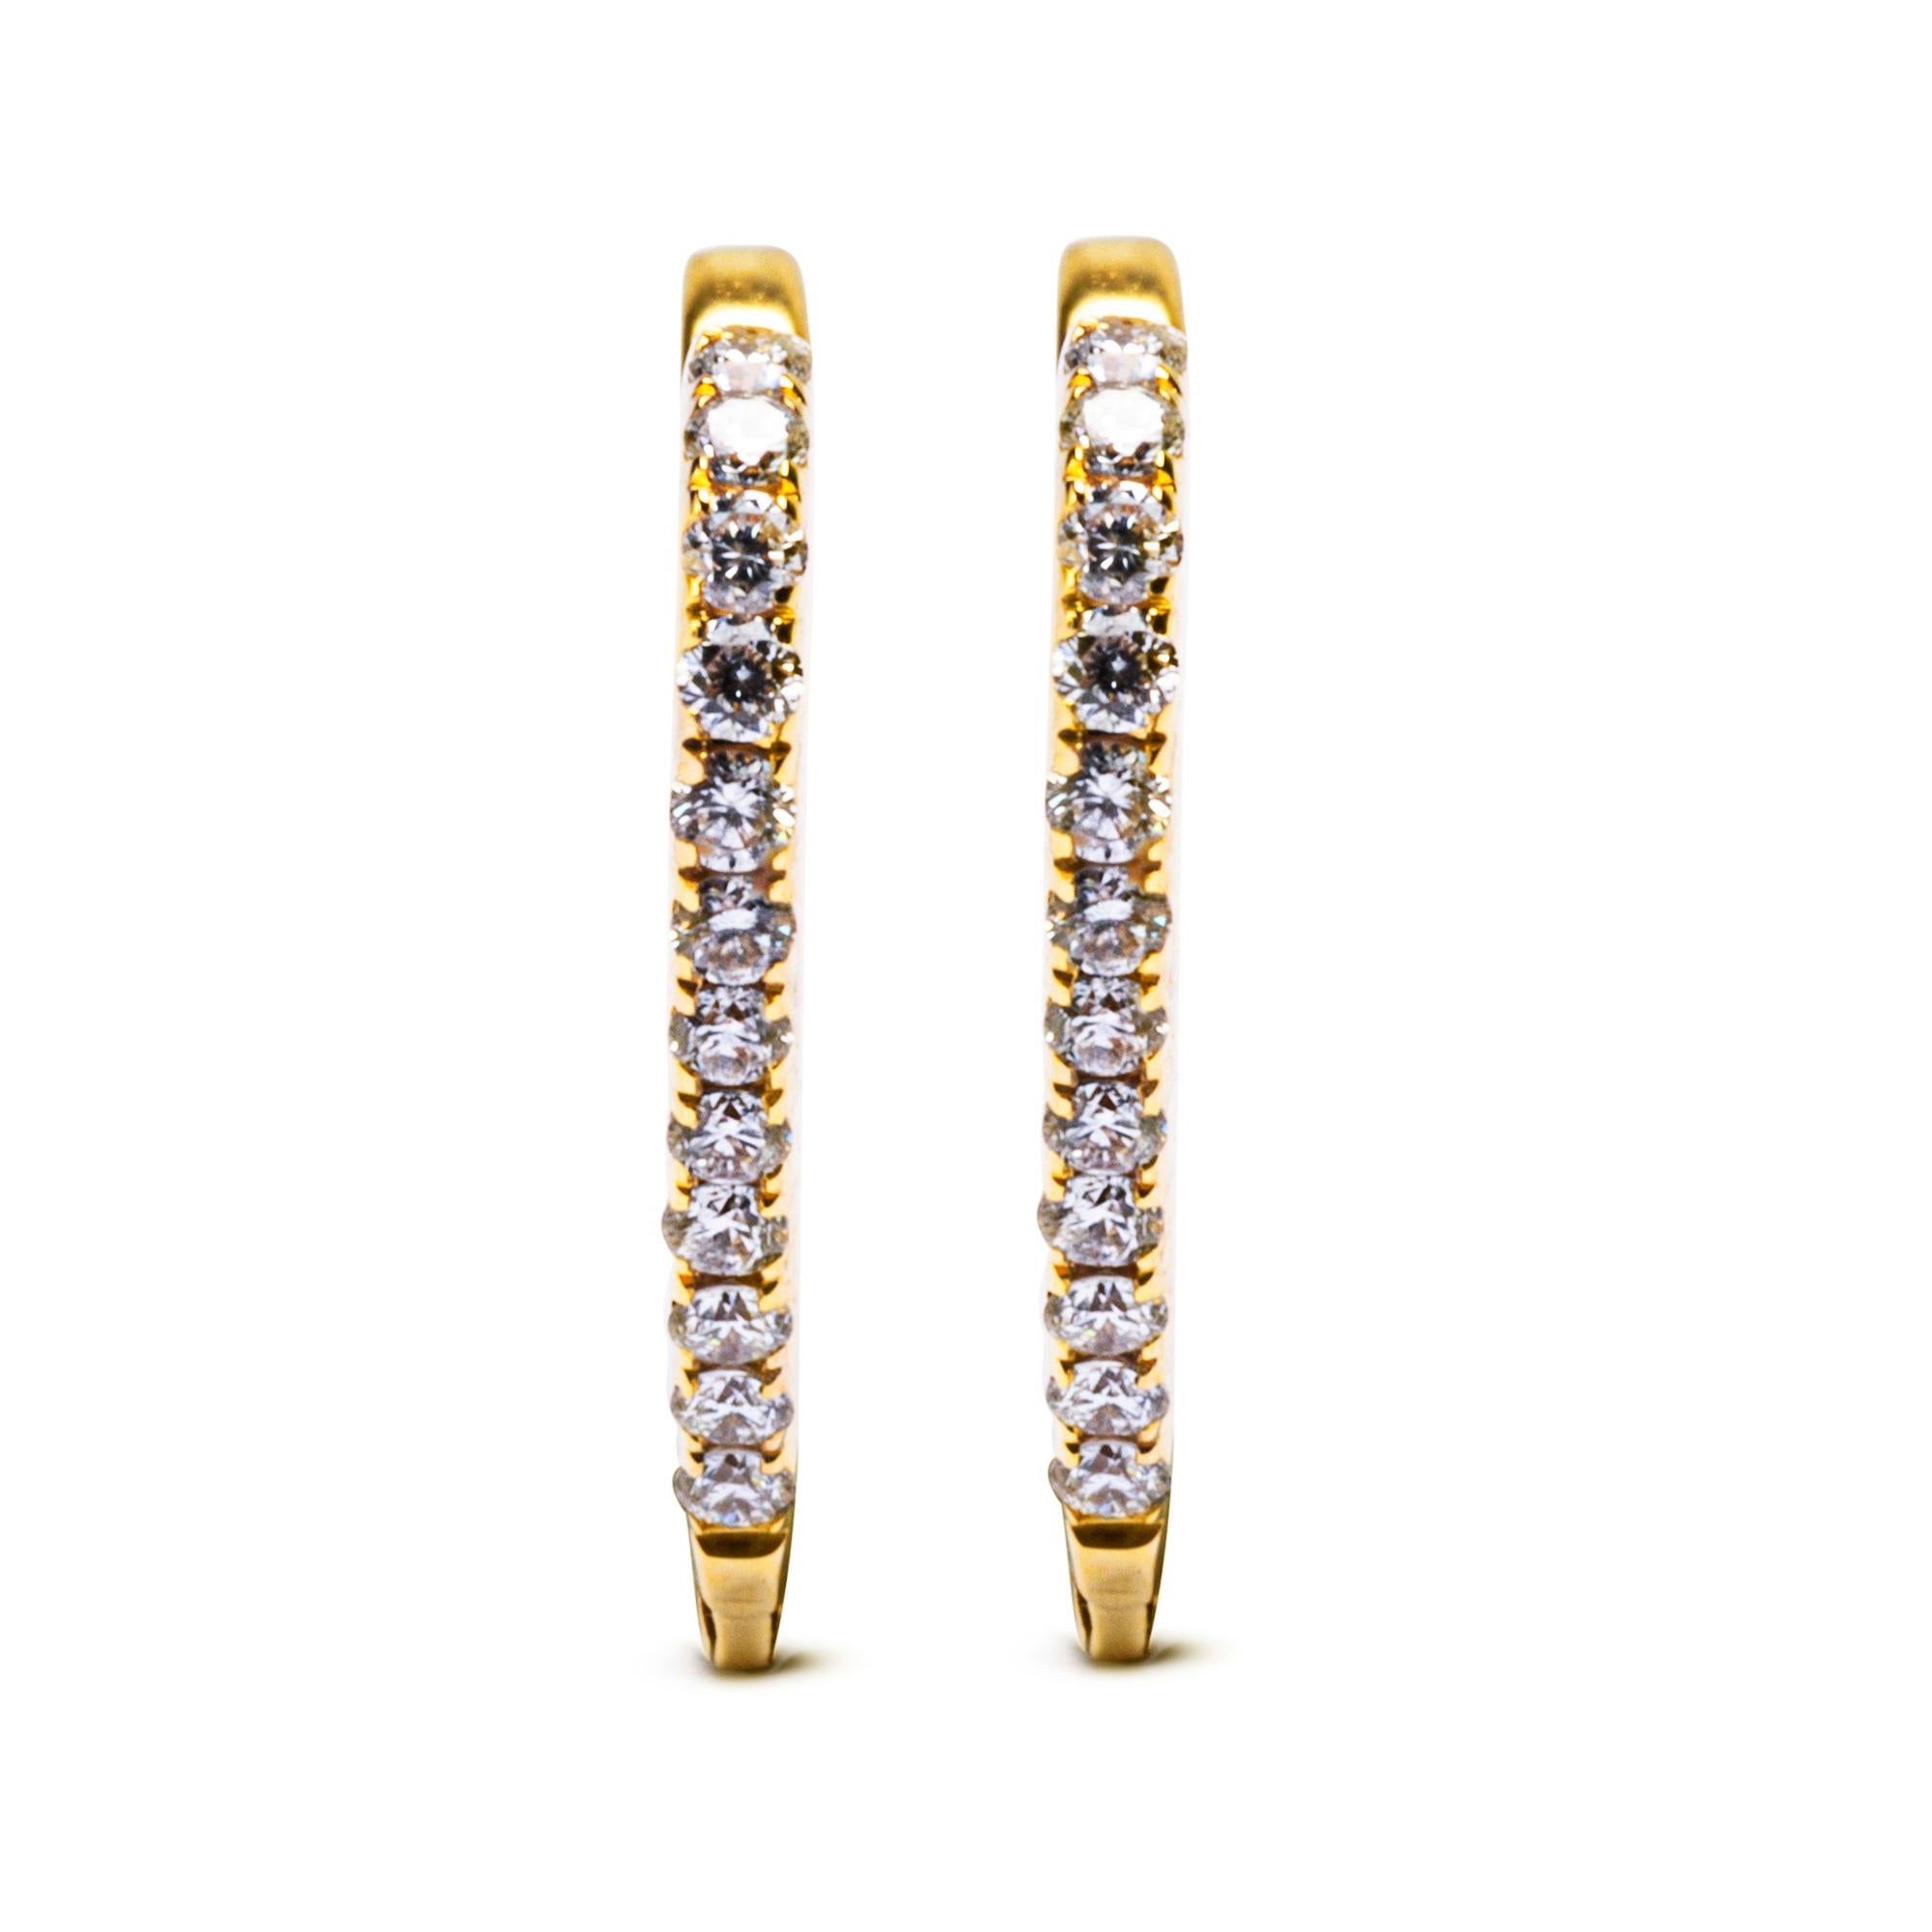 Alex Jona design collection, hand crafted in Italy, 18 karat yellow gold heart earrings set with 0.22 carats of white diamonds, F Color, VVS1 Clarity. 
Dimensions: W 0.05in/1.5mm, H 0.55in/14mm, D 0.66in/16.77mm.

Alex Jona jewels stand out, not